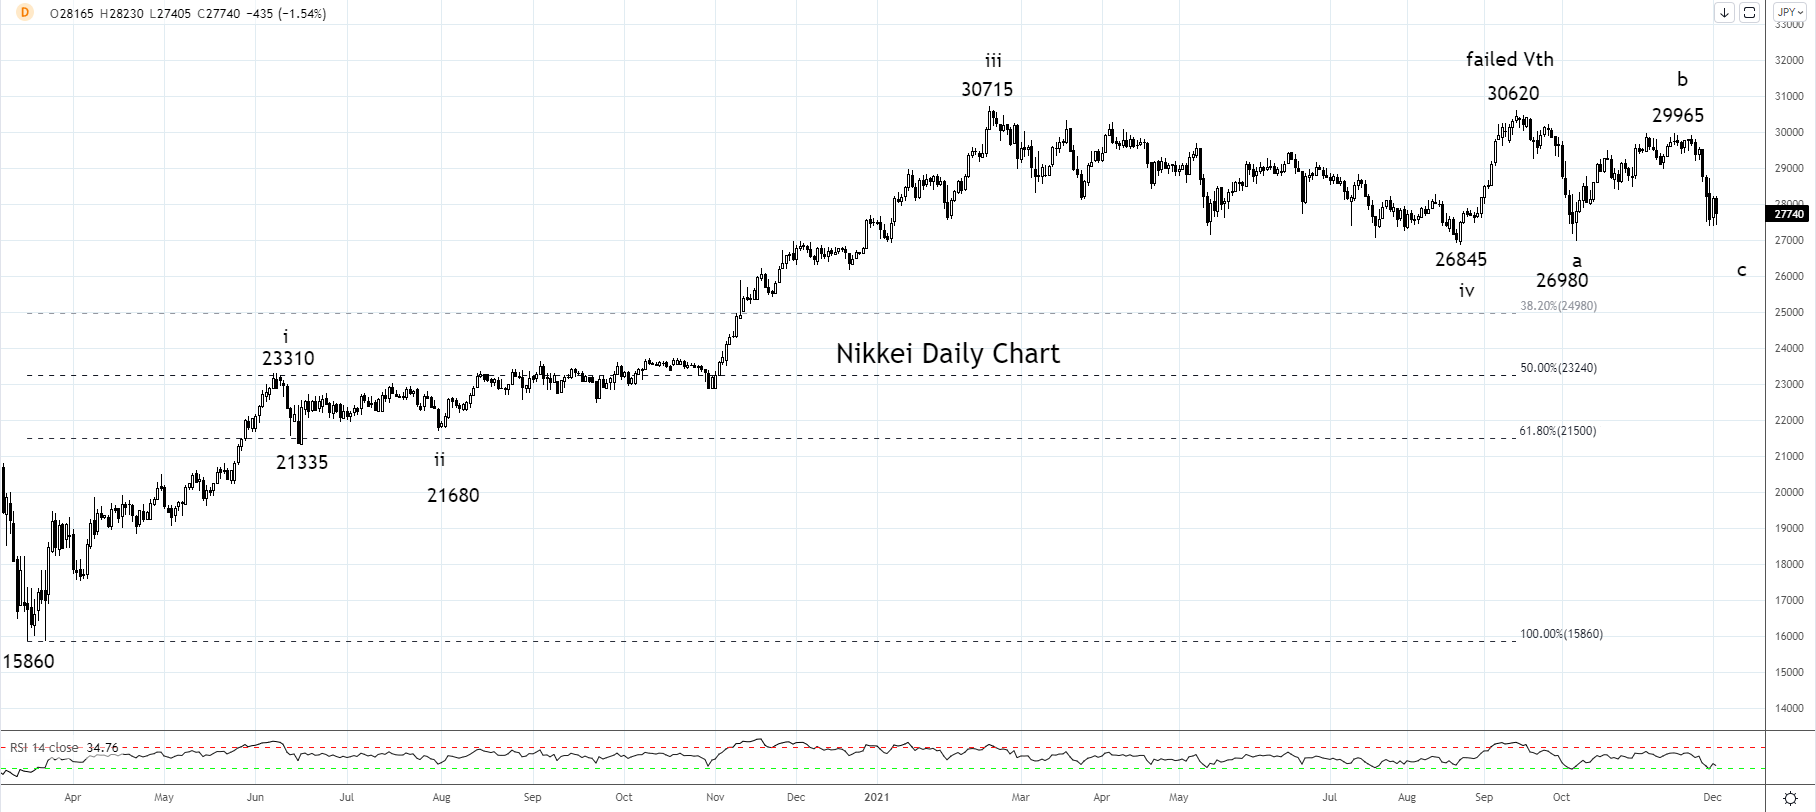 Nikkei Daily Chart 2nd of Dec